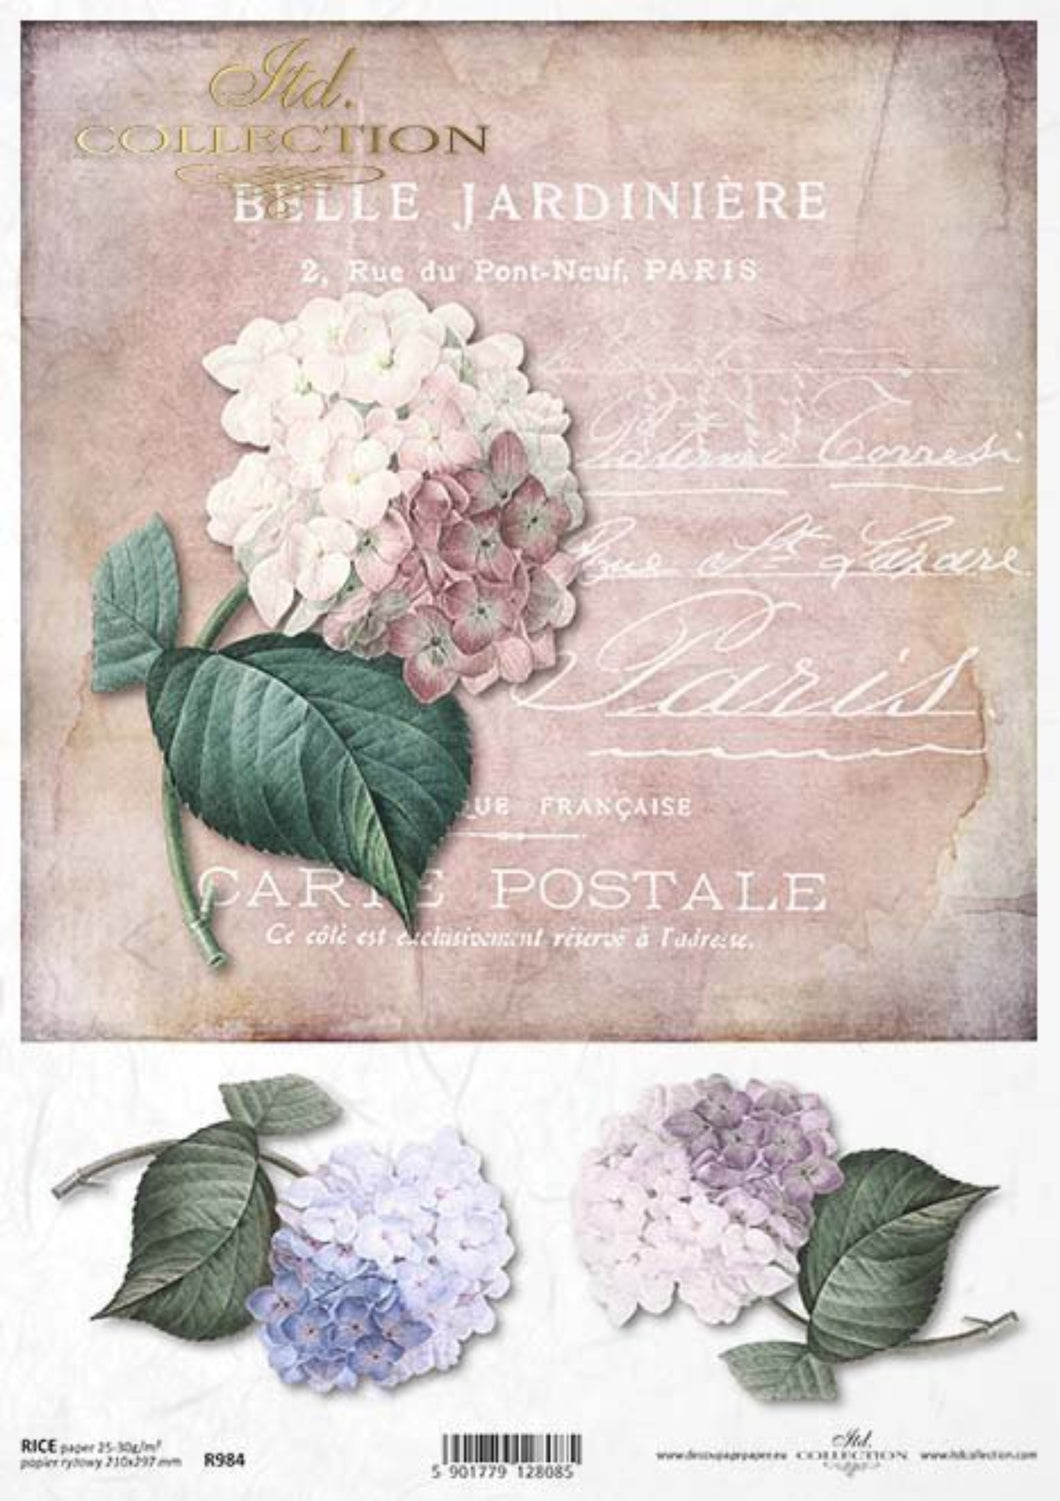 Vintage Postcard Hydrangeas R0984 Rice Paper by ITD Collection